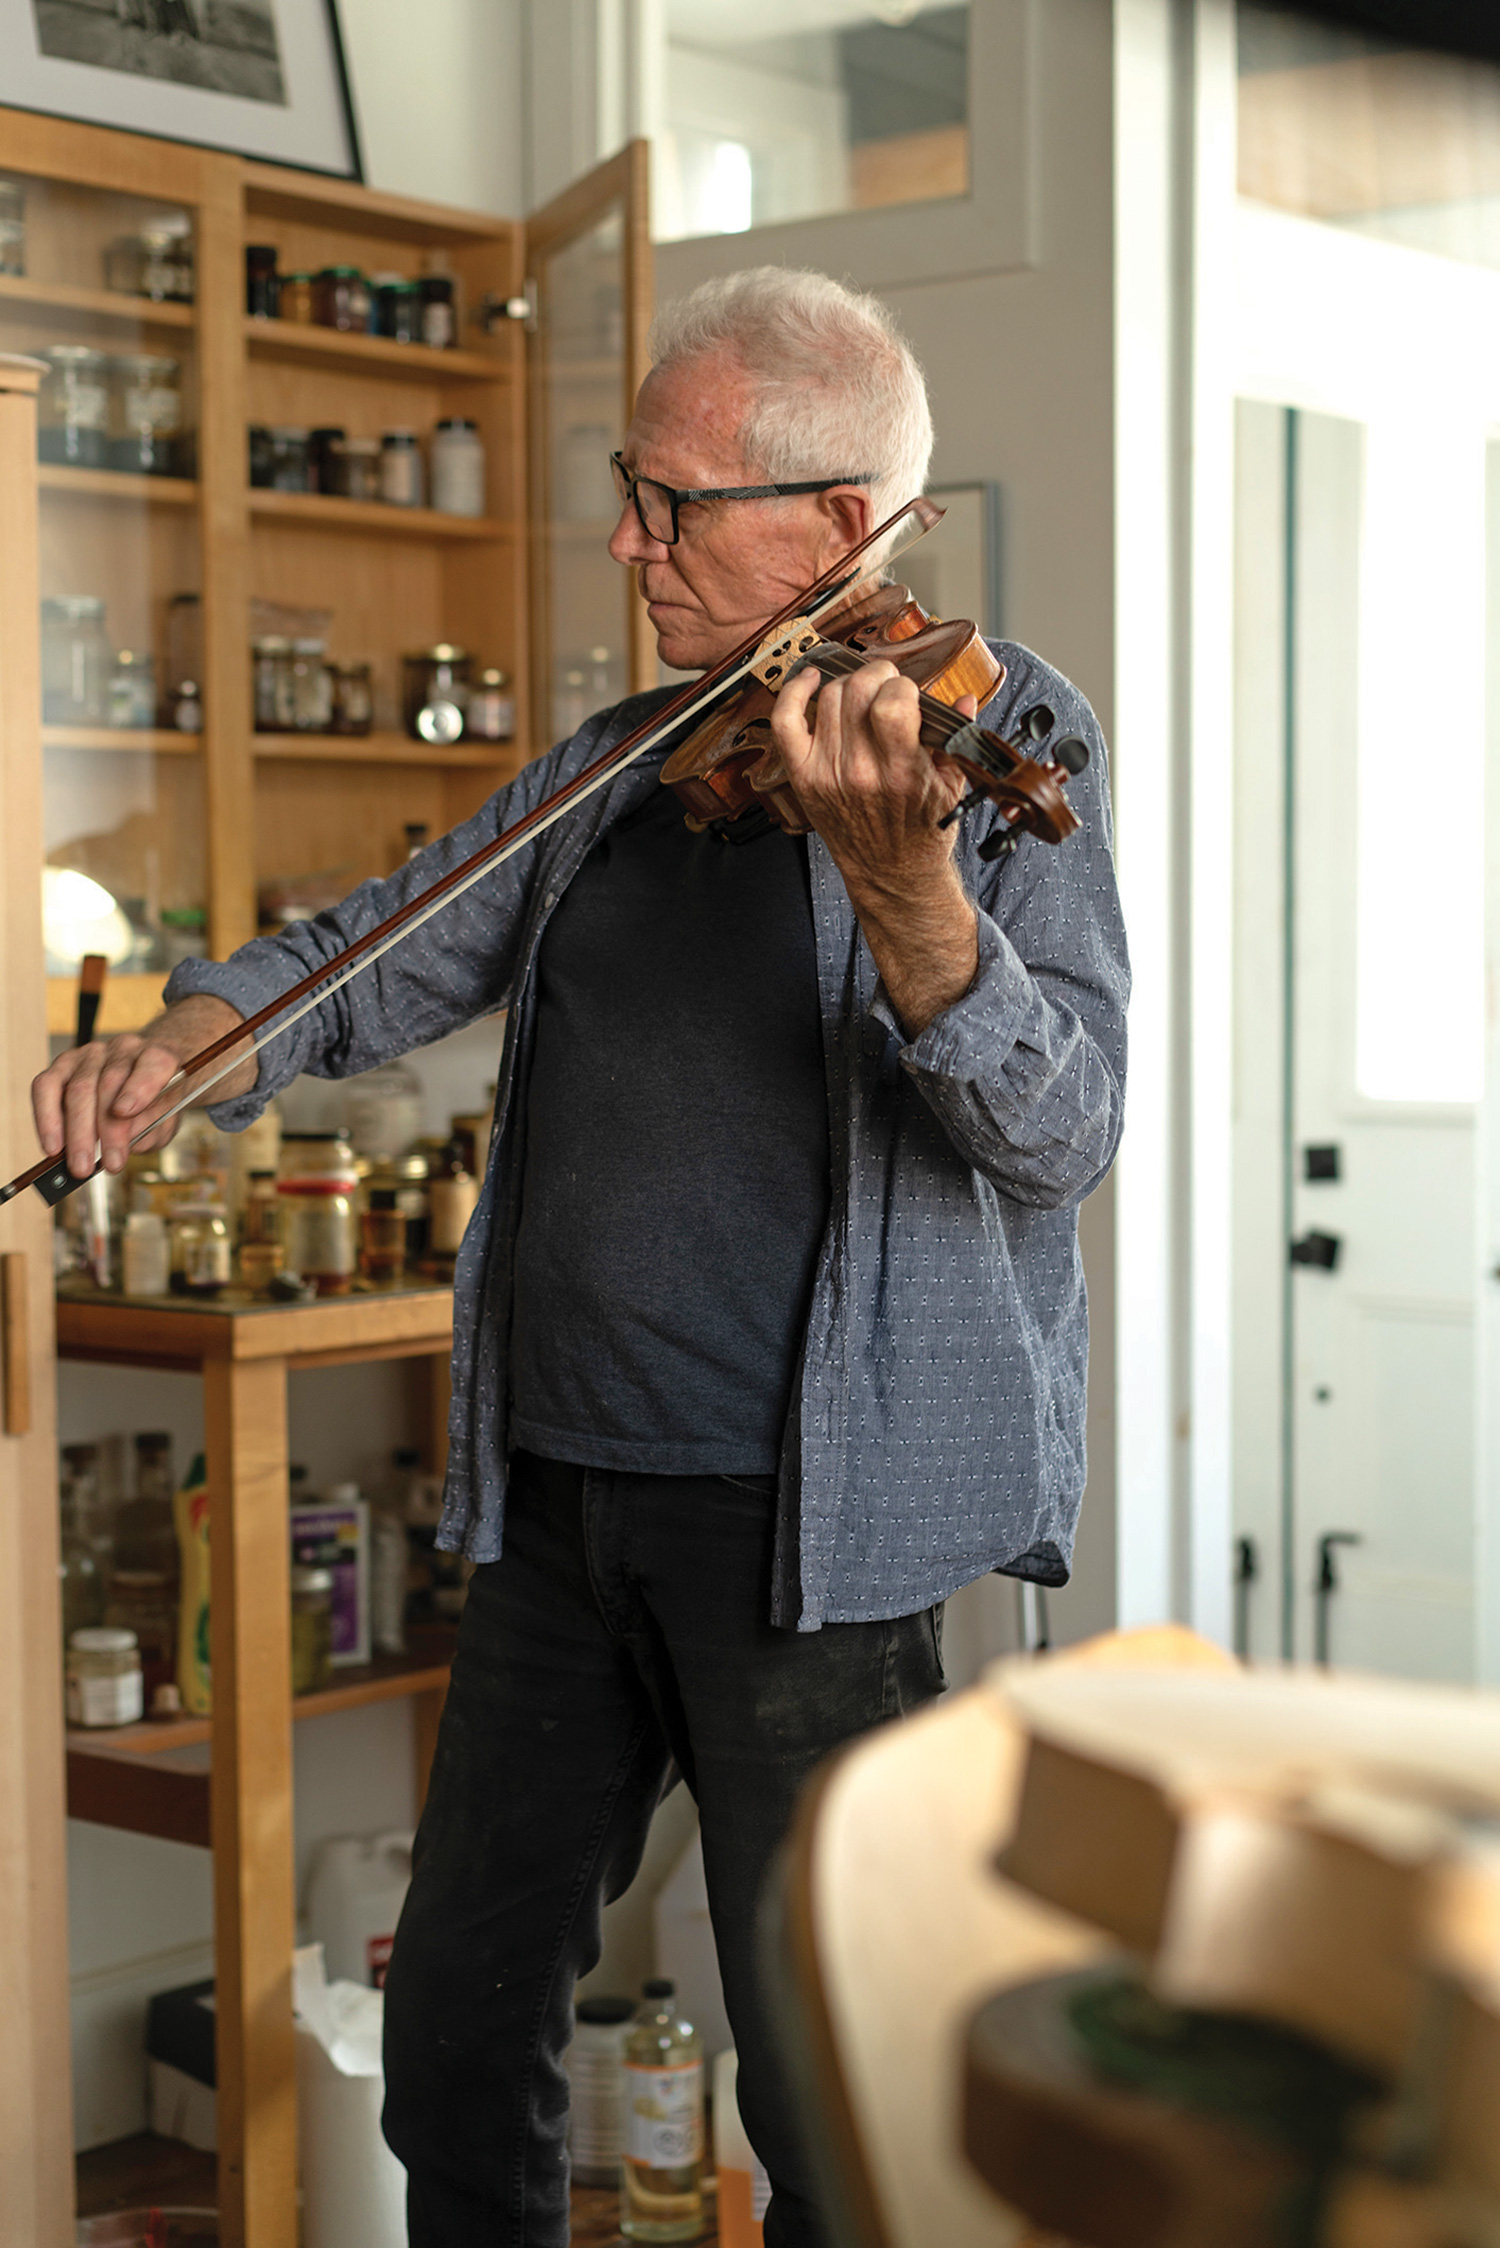 “I love the violin as an object,” says David Prentice in his workshop in downtown Flesherton.